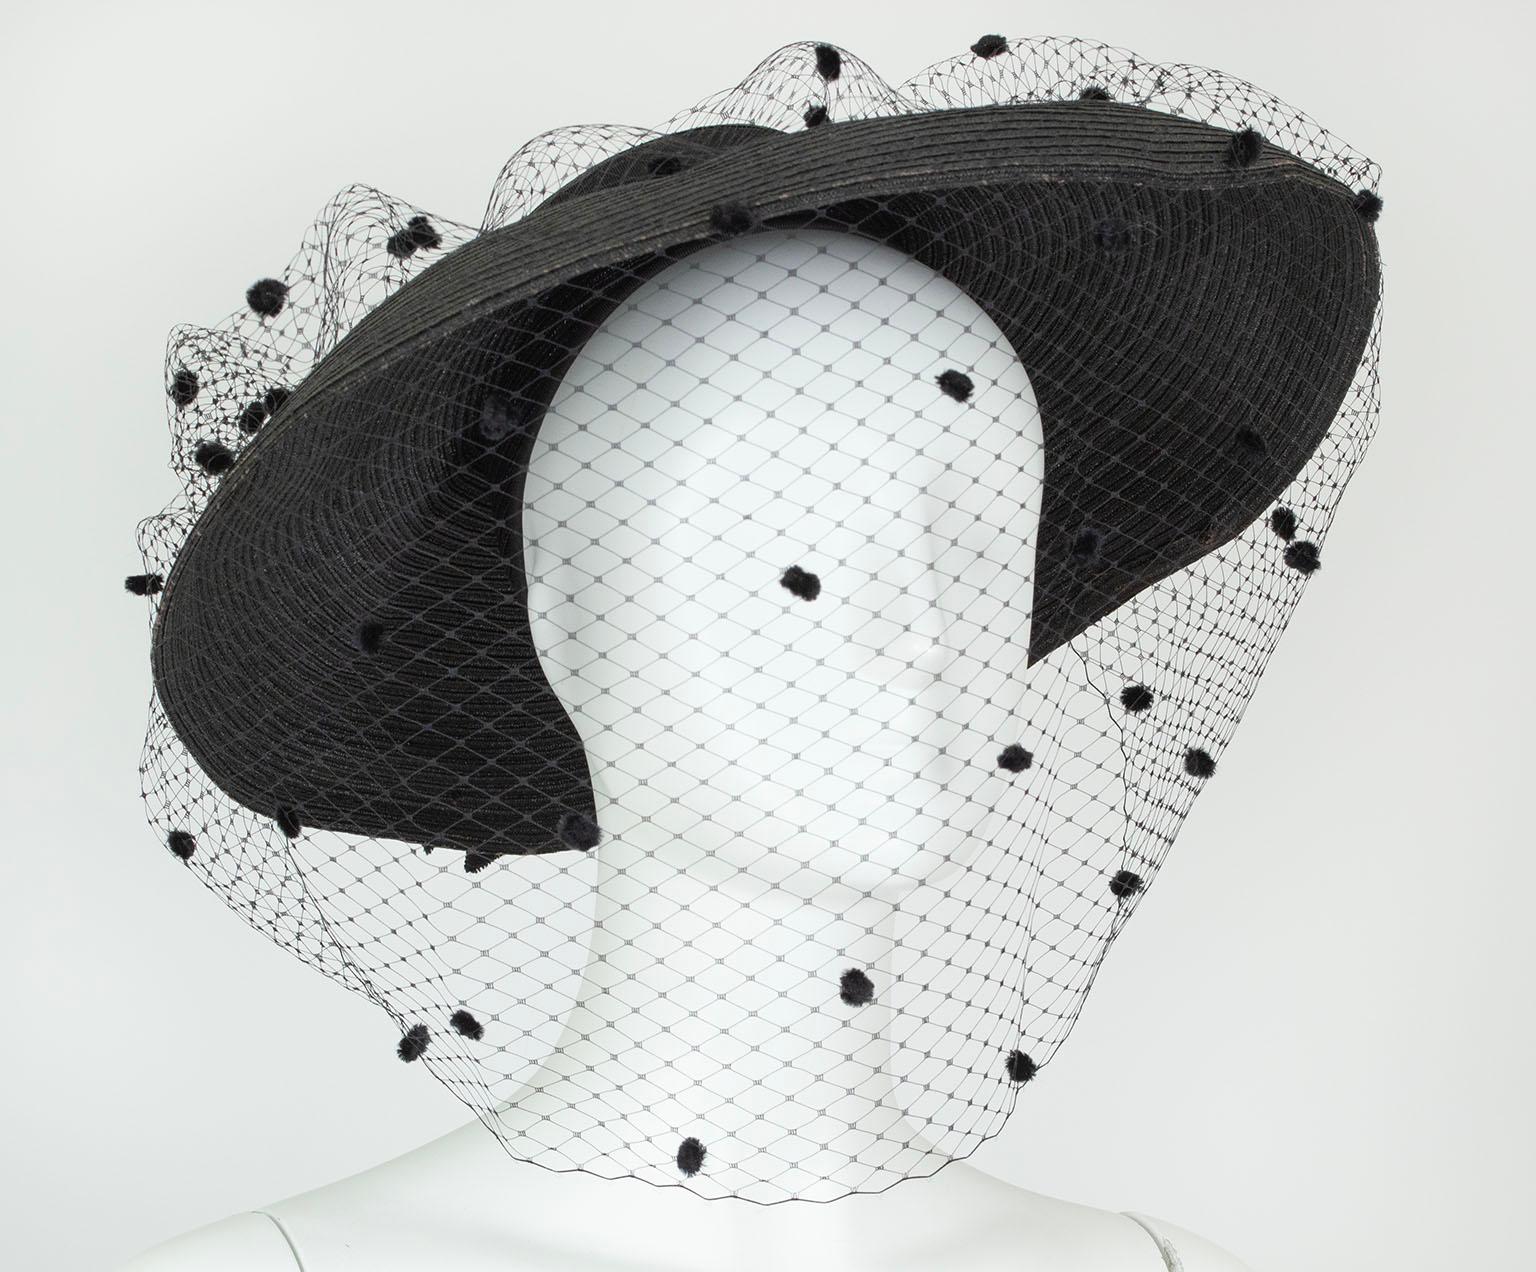 Appropriate for a multitude of occasions from mourning to tea to church to cocktails, this magnificent cartwheel hat gushes both propriety and drama thanks to its foot-long chenille dot veil. An integrated interior cap keeps it securely perched on